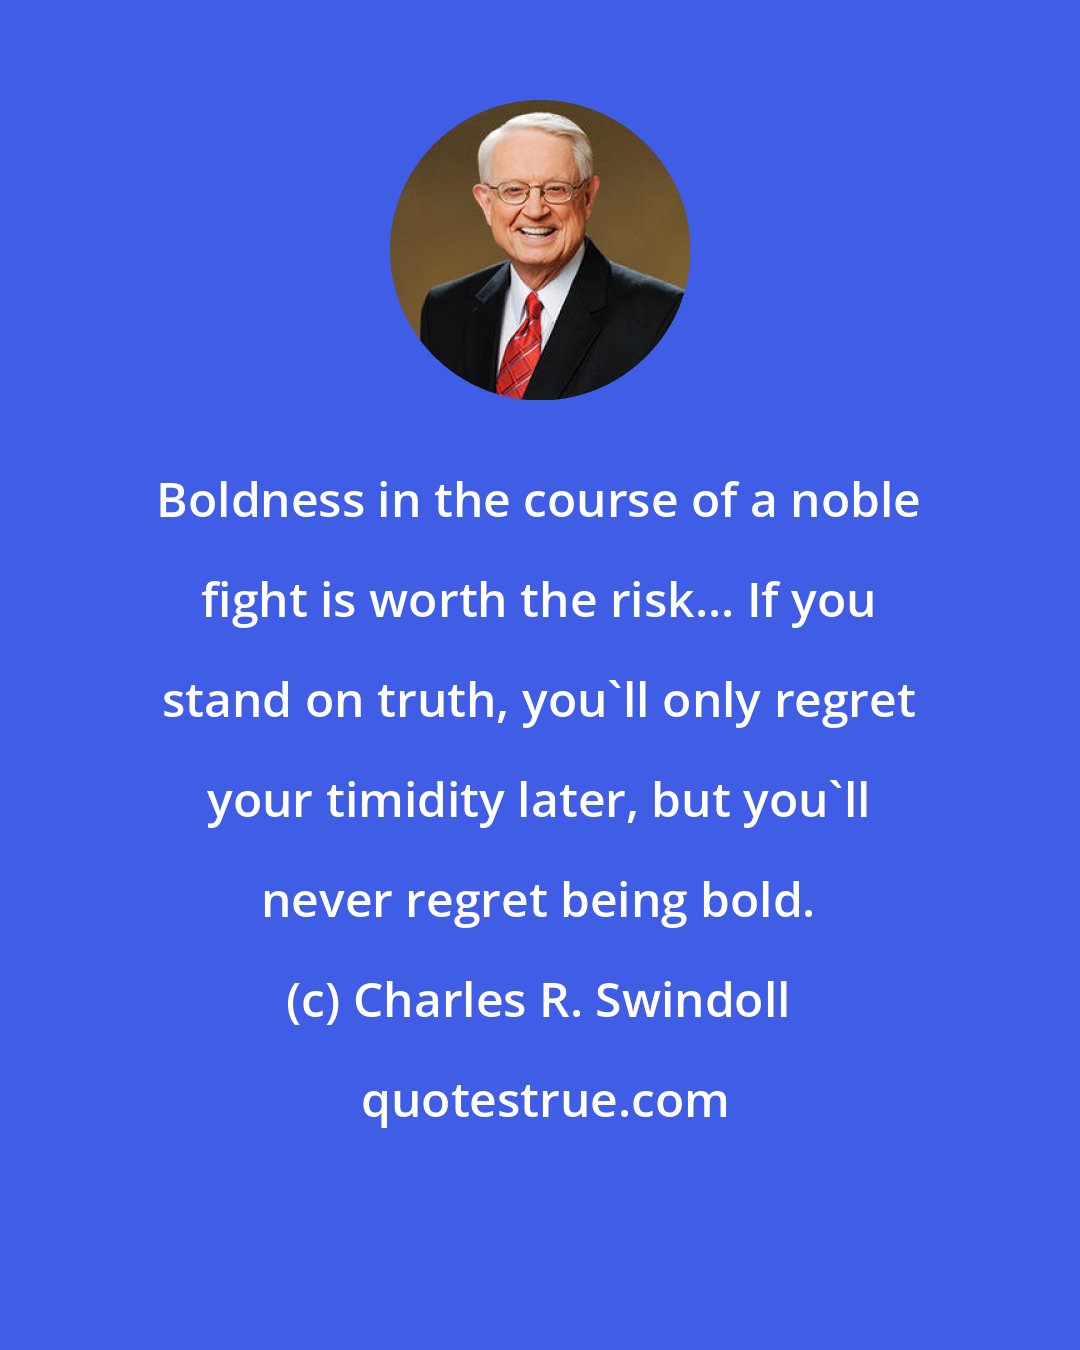 Charles R. Swindoll: Boldness in the course of a noble fight is worth the risk... If you stand on truth, you'll only regret your timidity later, but you'll never regret being bold.